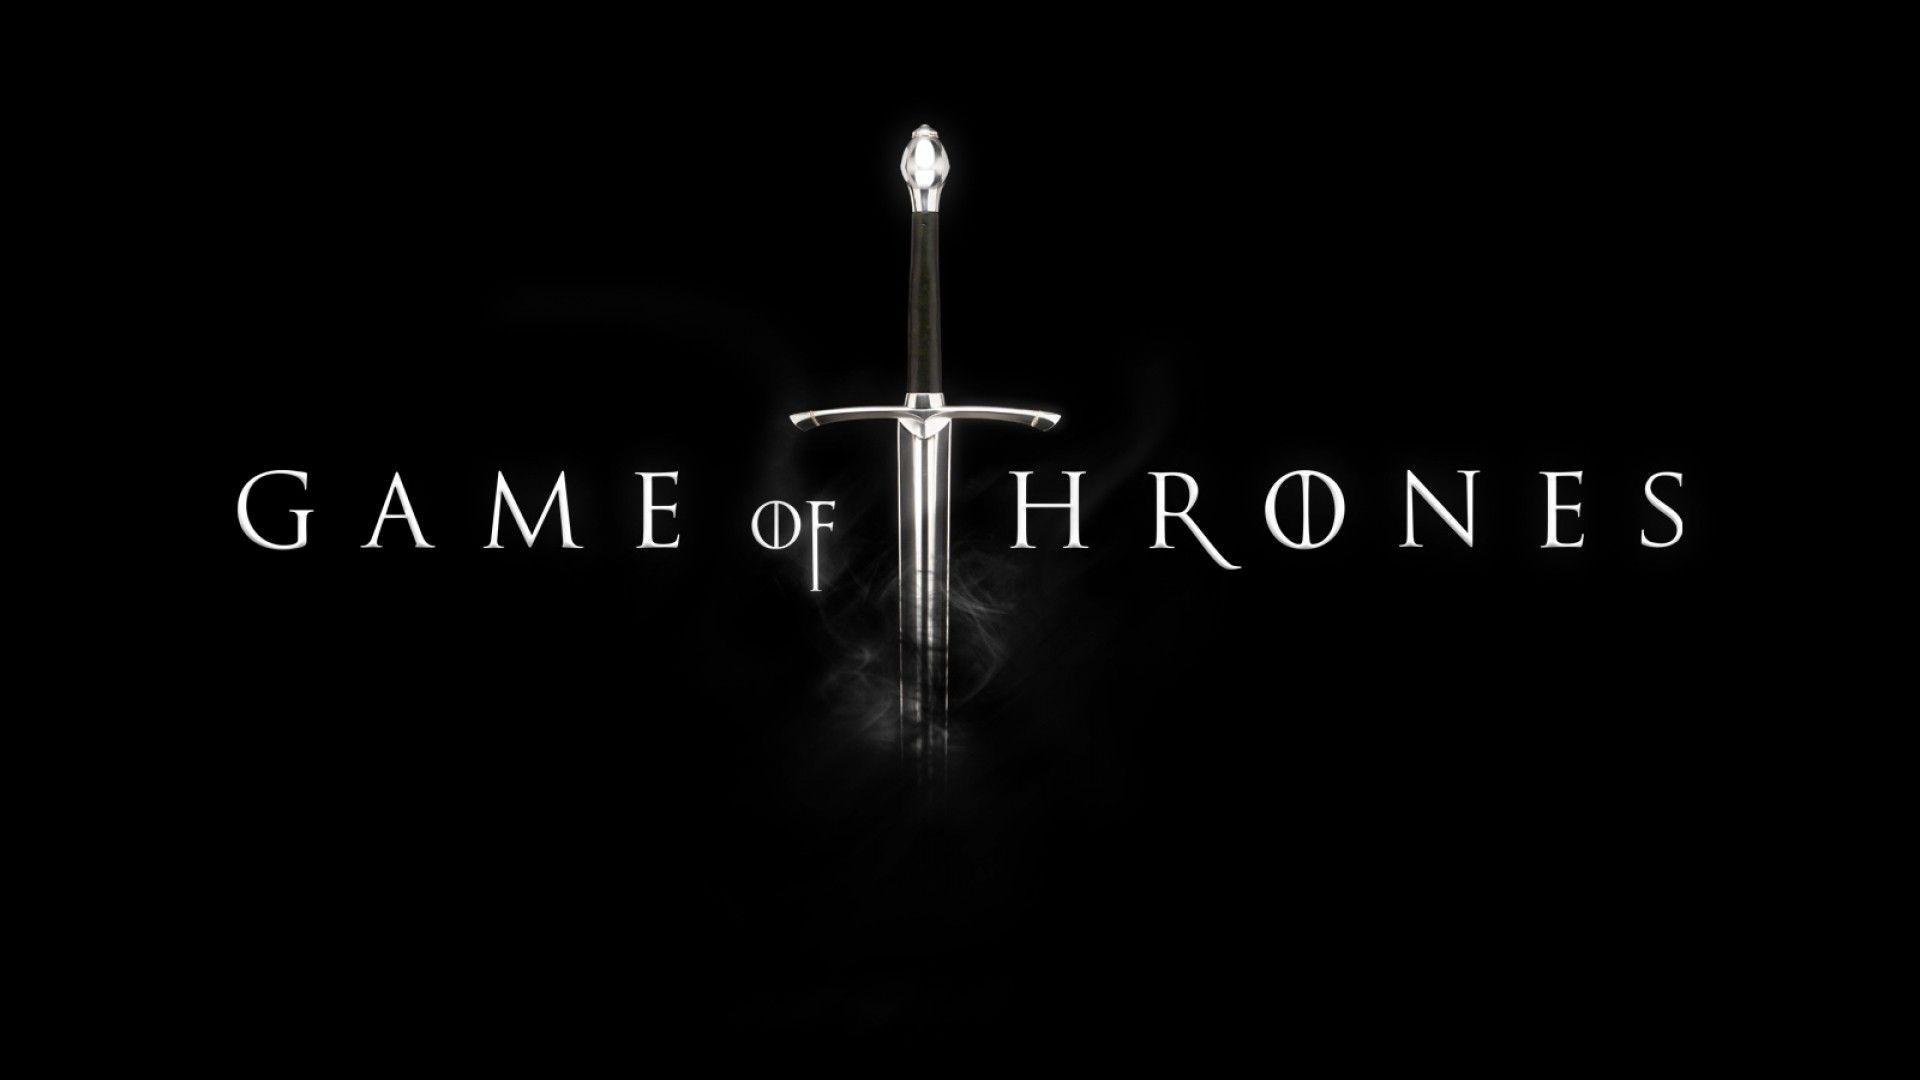 All Spoilers A collection of Game of Thrones wallpaper. Mostly